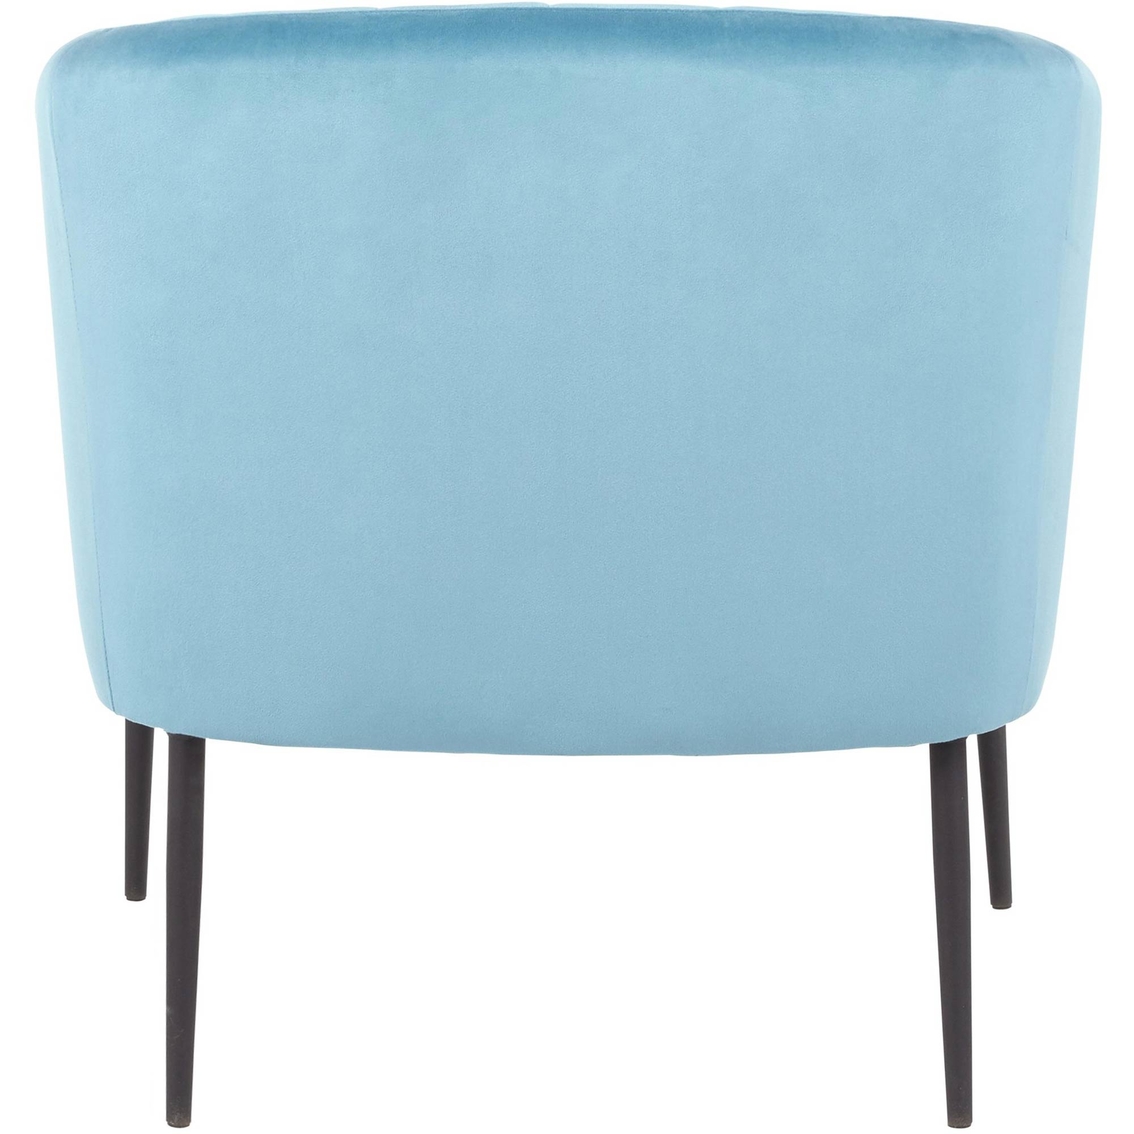 LumiSource Renee Accent Chair - Image 3 of 5